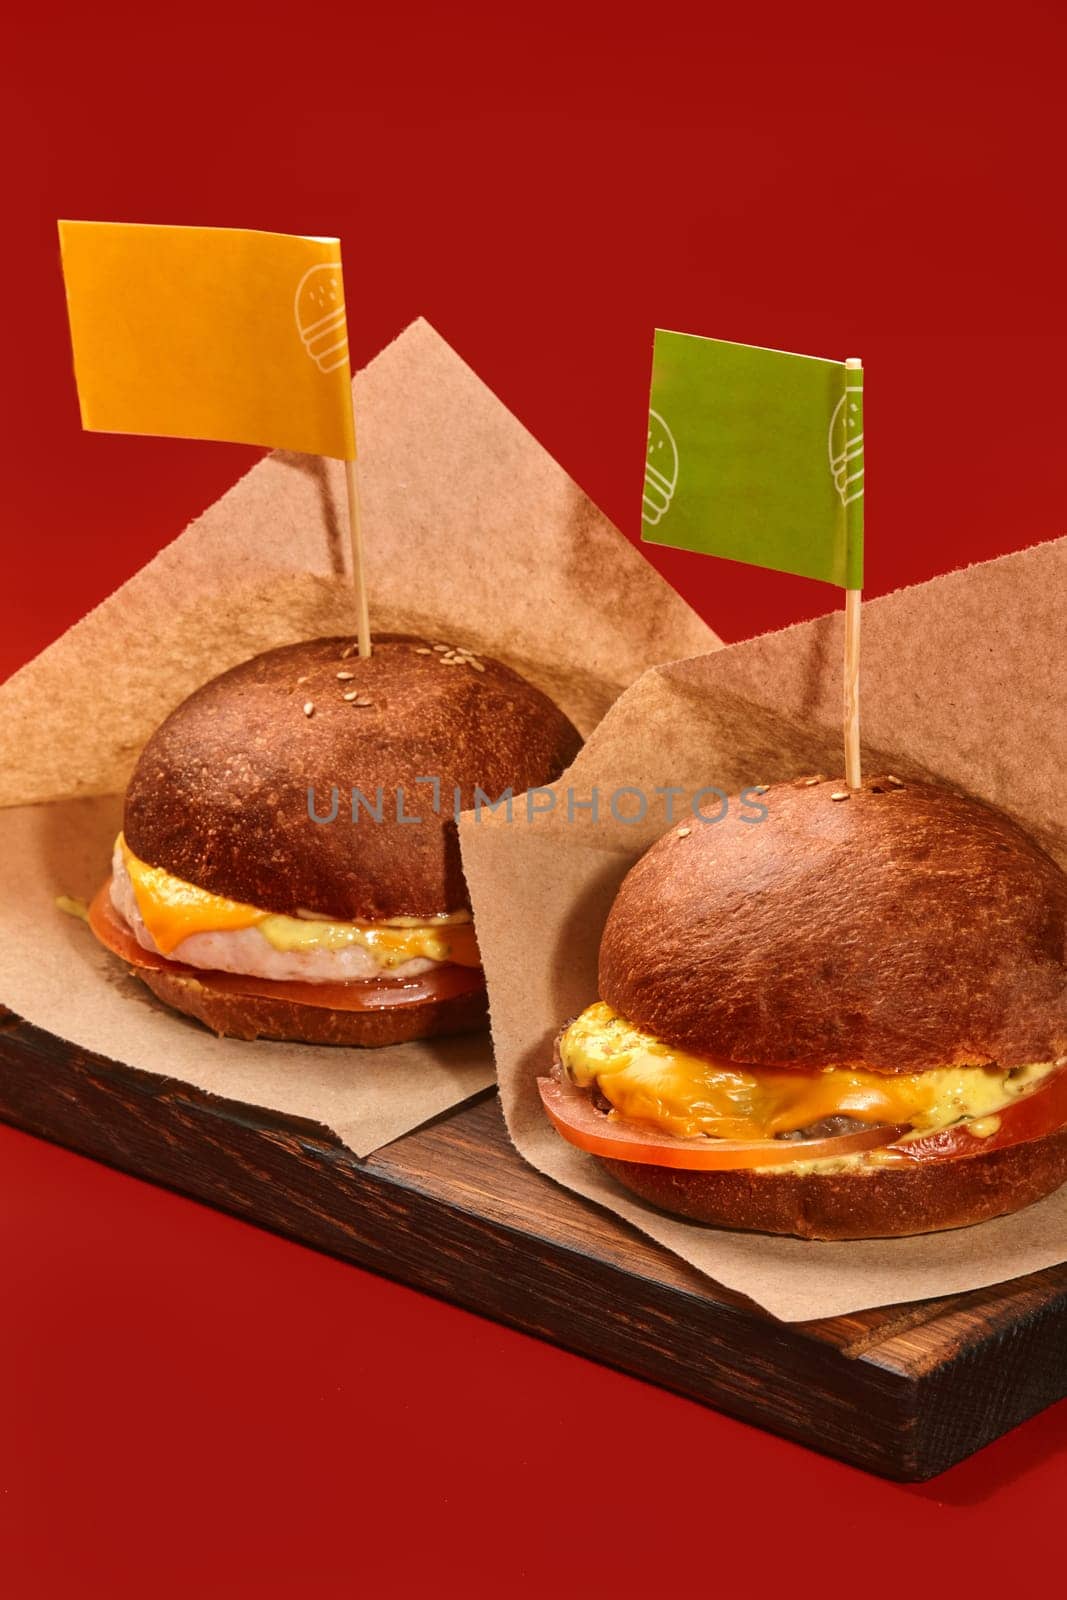 Two delicious burgers with juicy chicken and beef patties, tomato and cheese in browned buns decorated with colorful flags on toothpicks, served in craft paper on wooden serving board on red backdrop